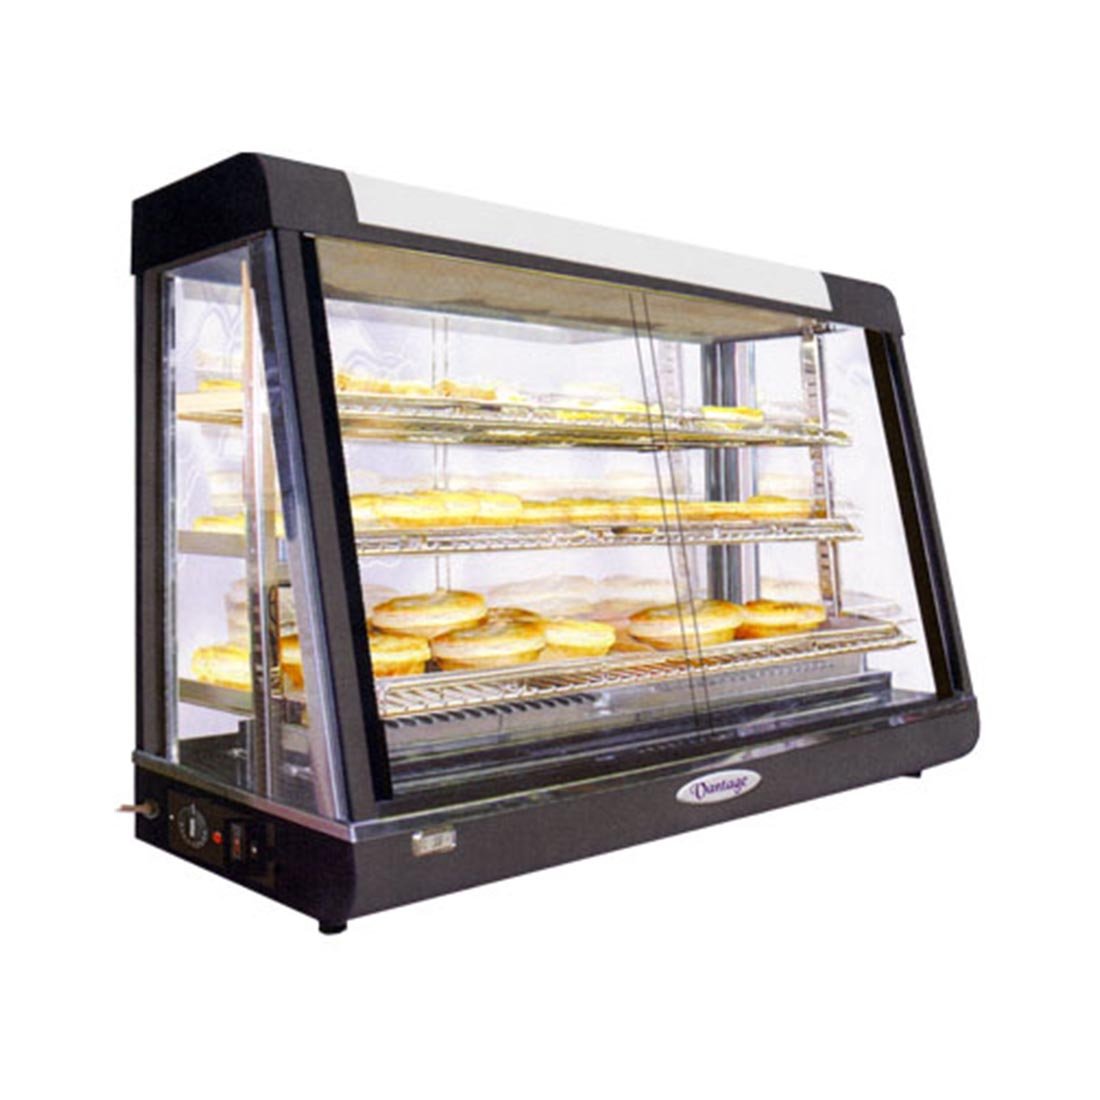 PW-RT/1200/1 Pie Warmer & Hot Food Display - Cafe Supply